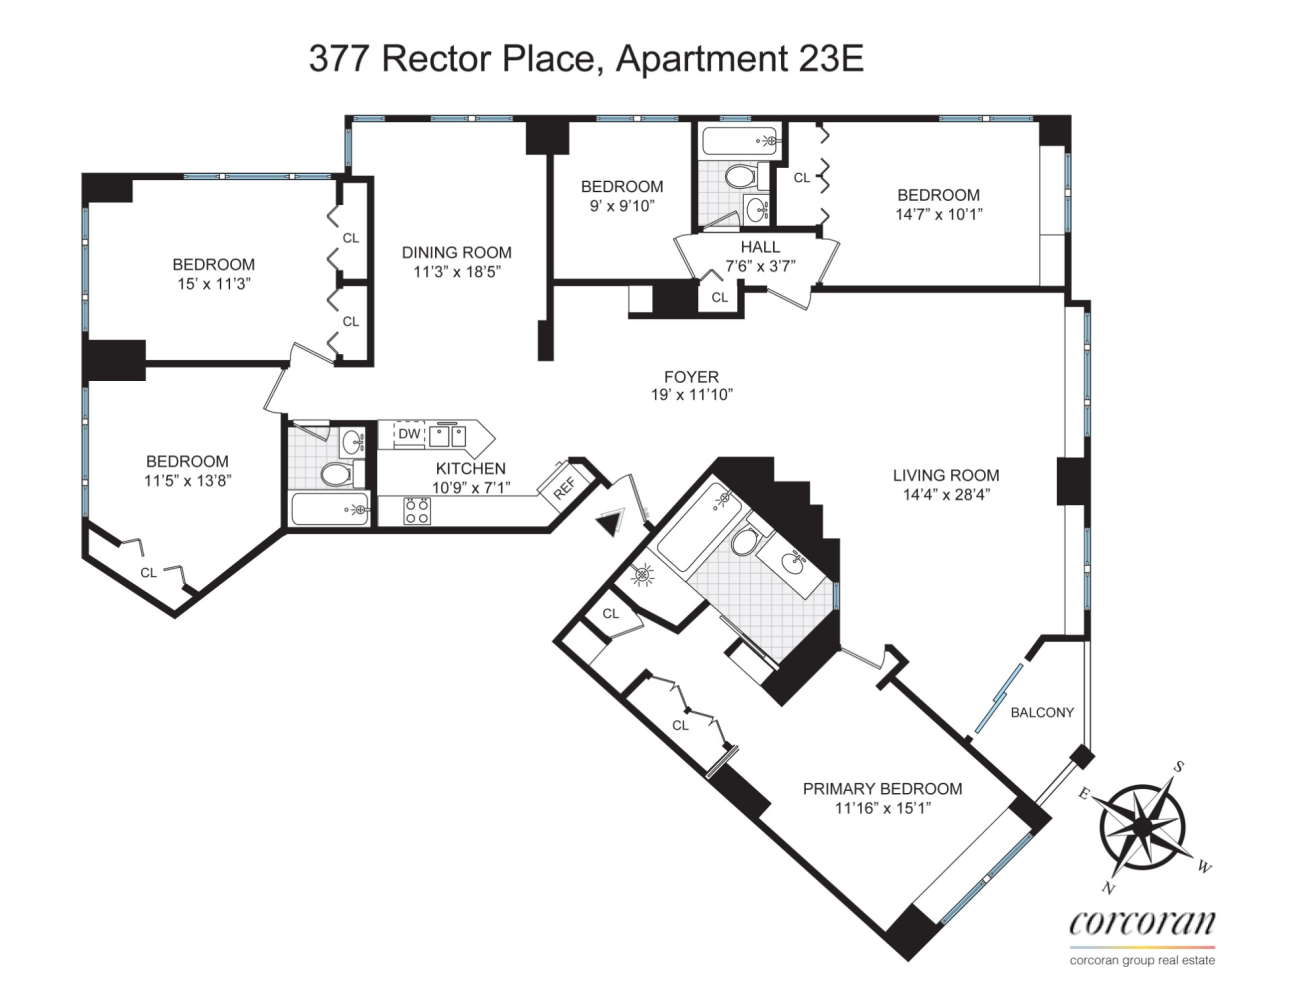 Floorplan for 377 Rector Place, 23E